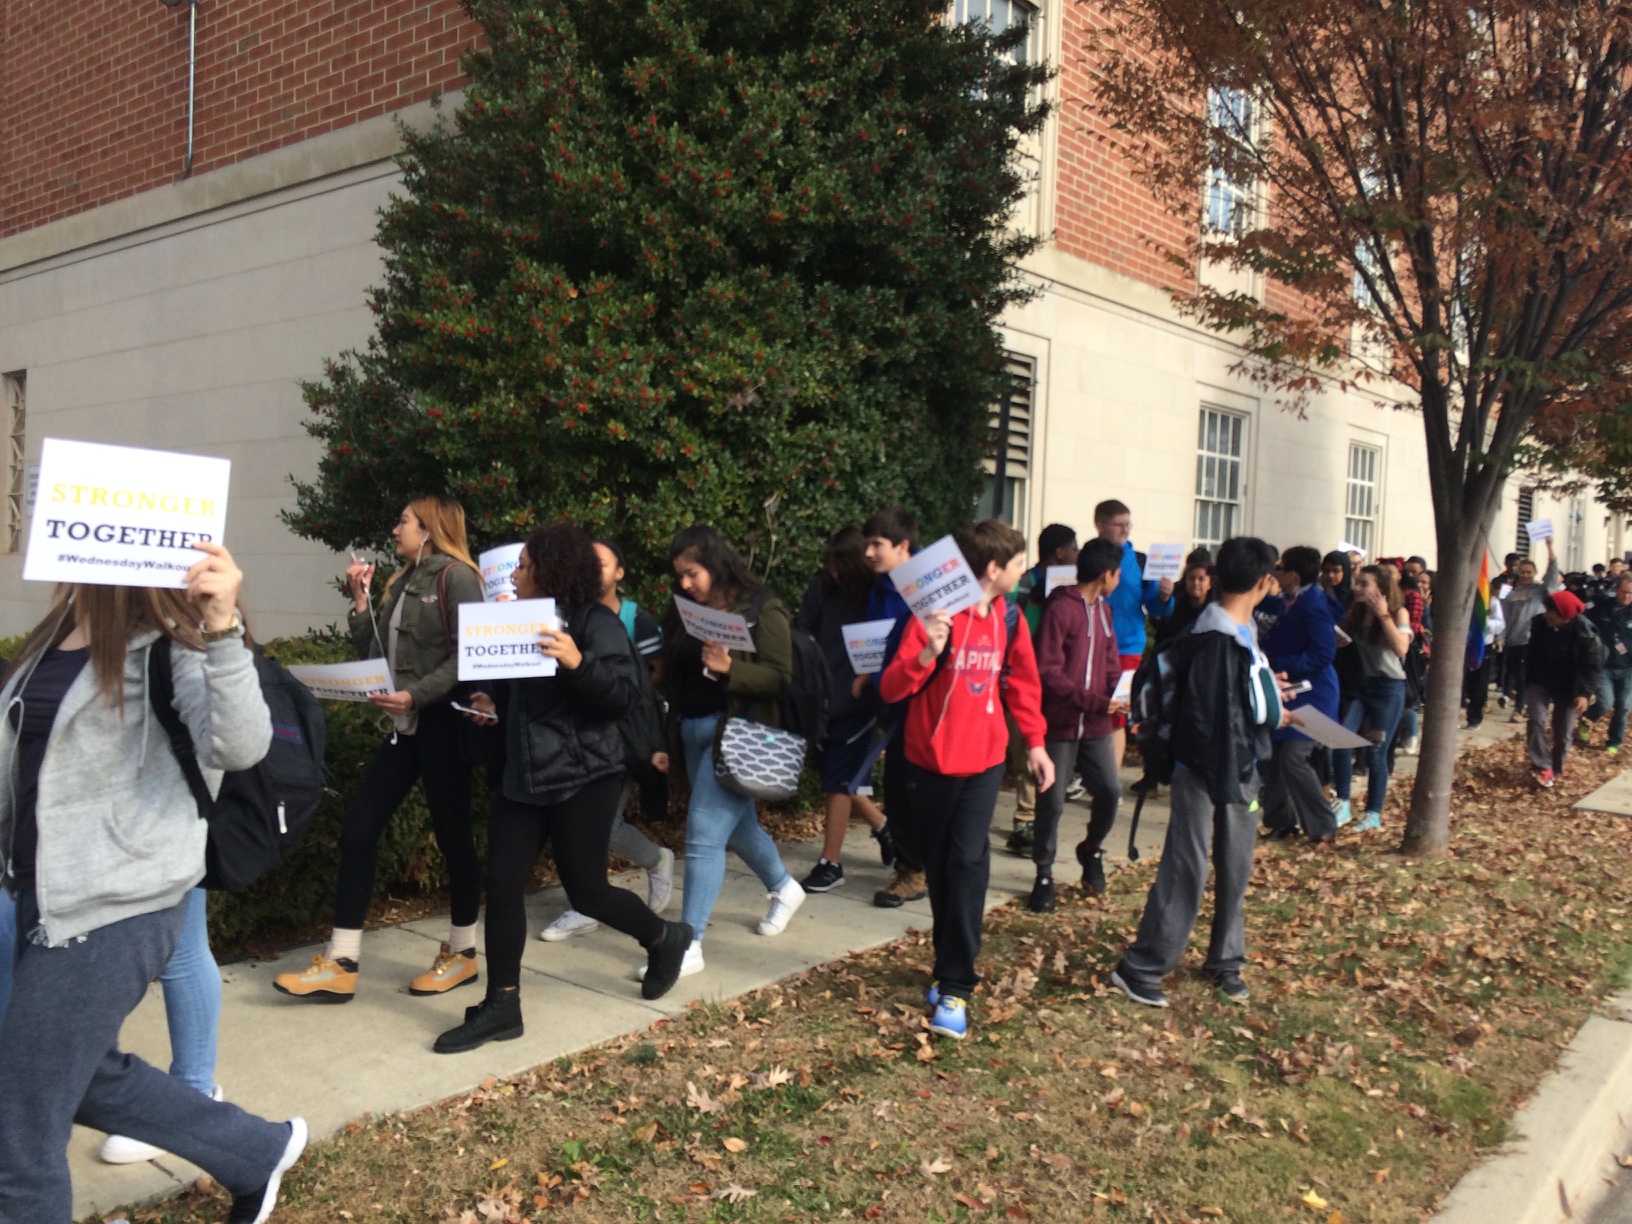 Students from Richard Montgomery High School, in Rockville, march in protest of the election of Donald Trump to the presidency Wednesday morning. A 15-year-old in a 'Make America Great Again' hat was beaten during the march. (WTOP/Nick Iannelli)